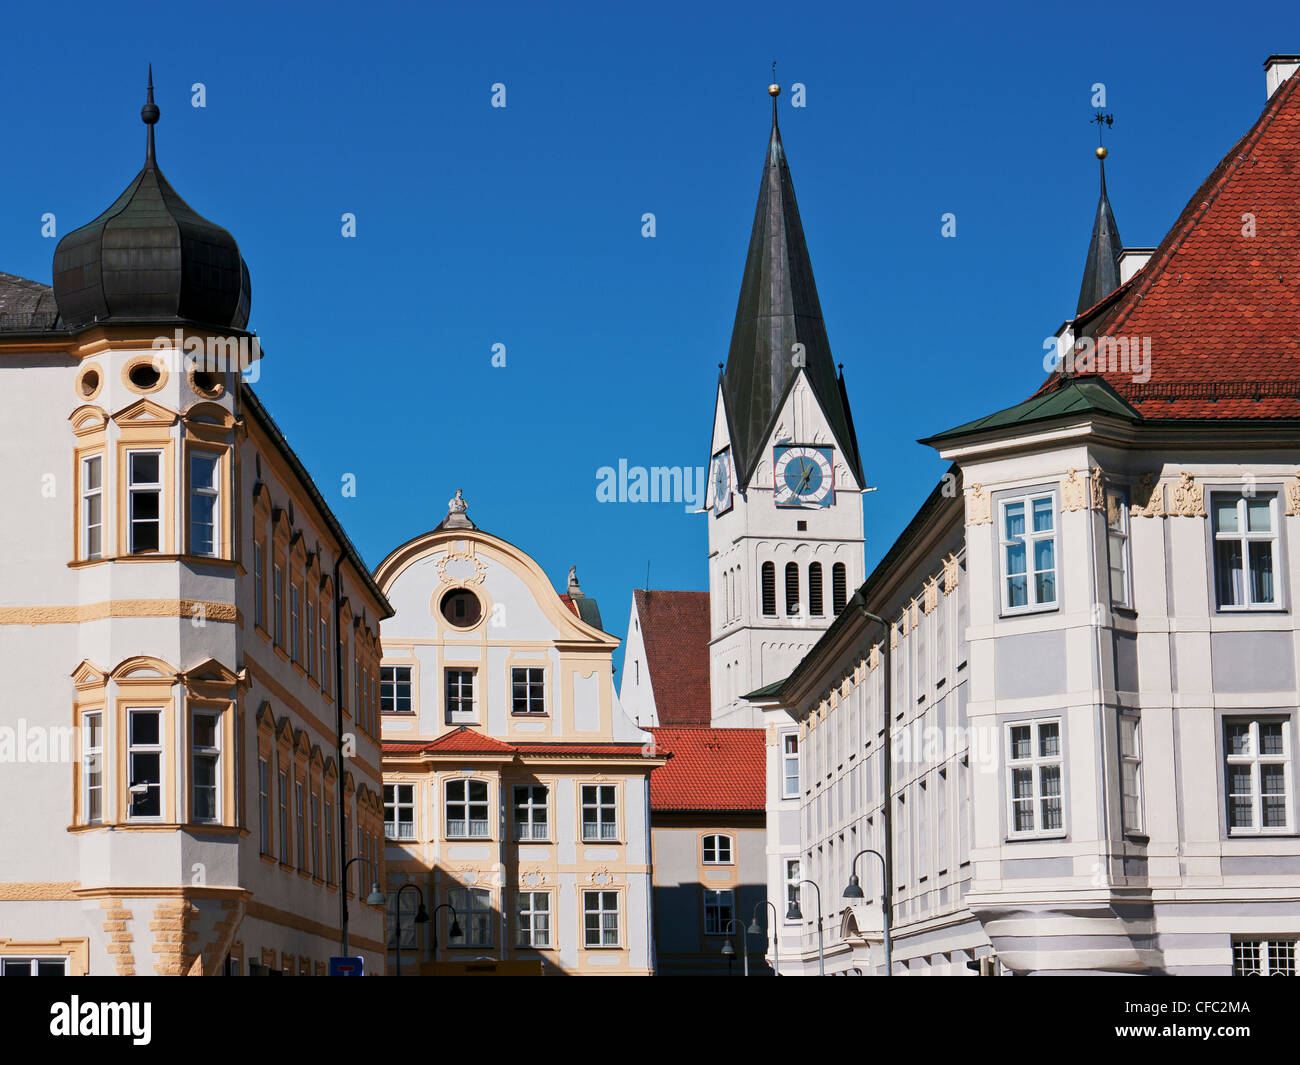 Bavaria, Upper Bavaria, domestic architecture, colorful, colourful houses, bowfront, bow front, bay, oriel, Germany, Eichstätt, Stock Photo